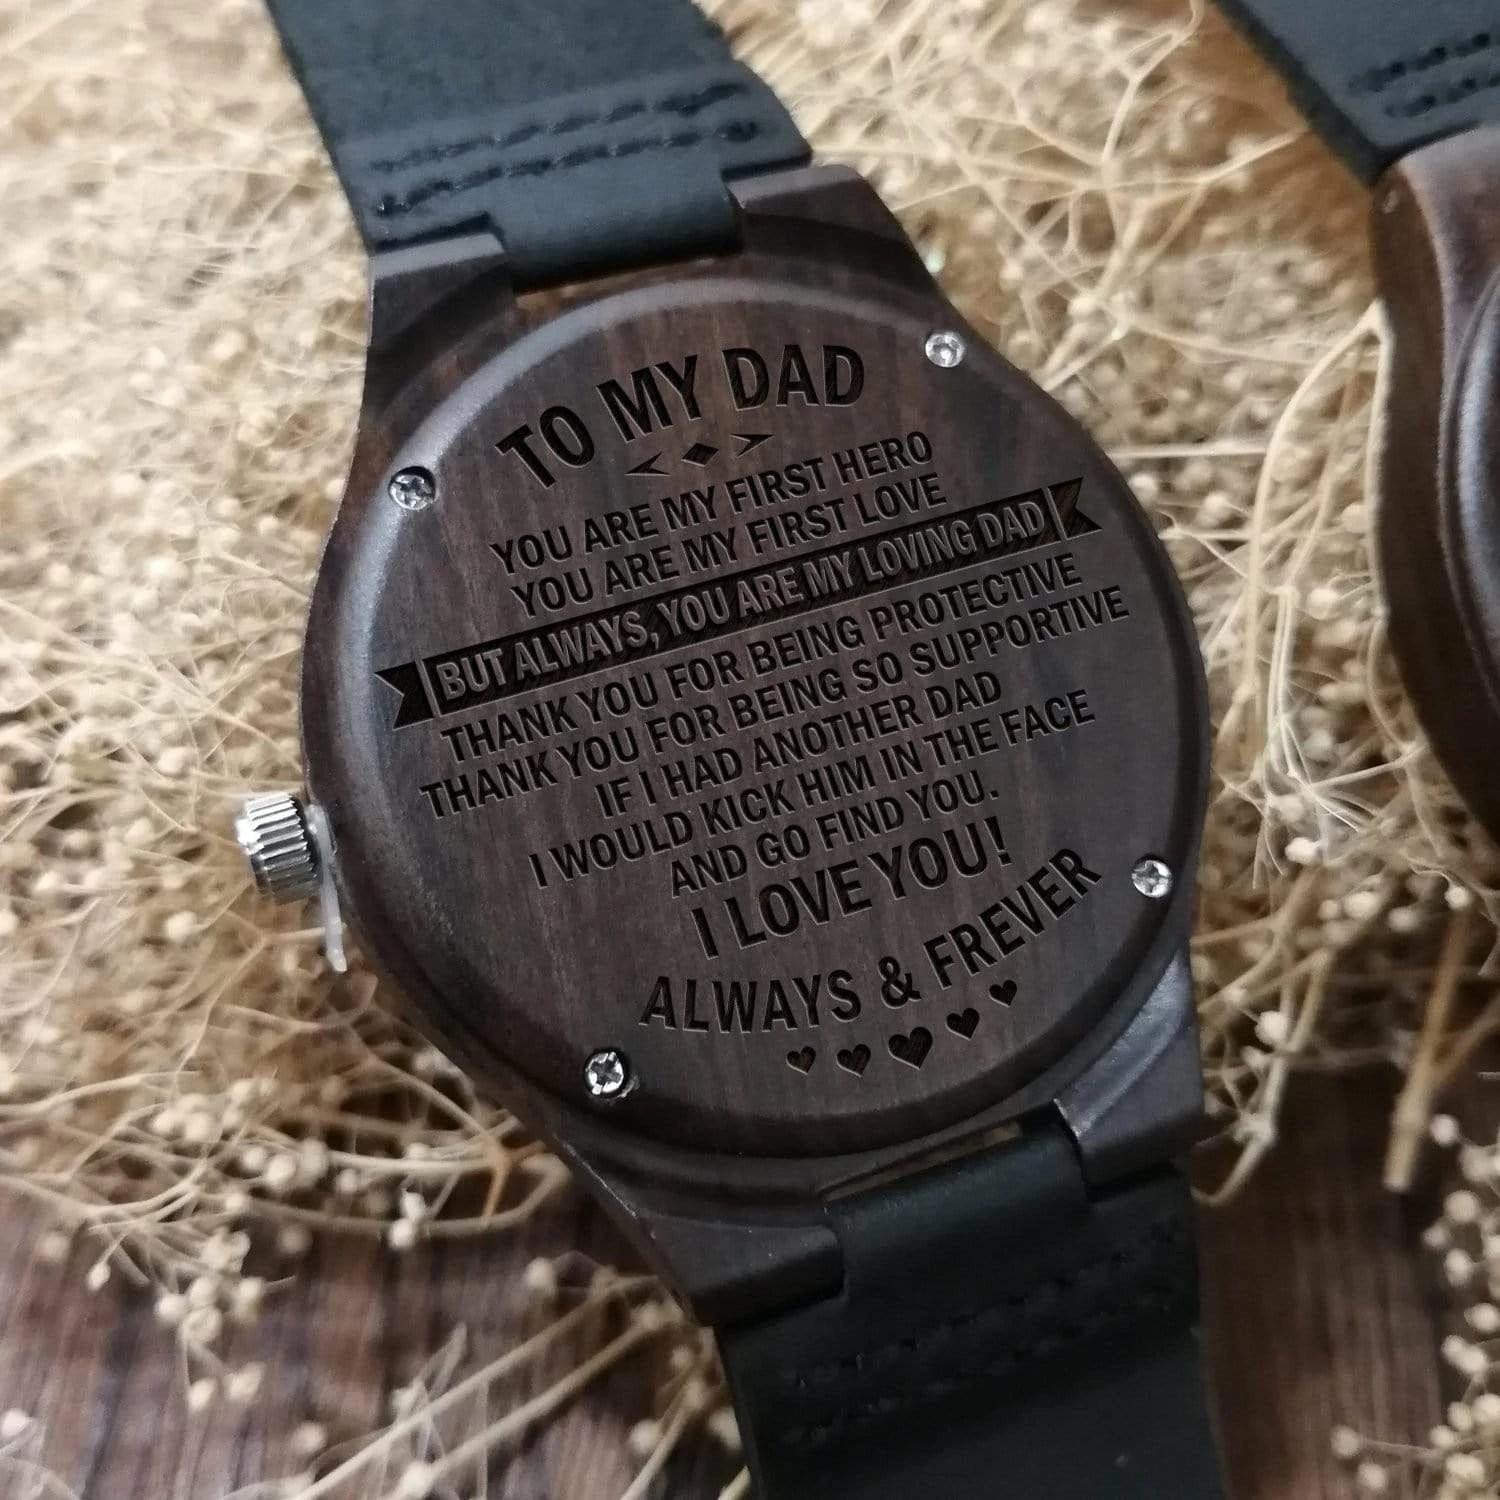 Wonderful Engraved Wooden Watch Gift For Dad You Are My First Hero